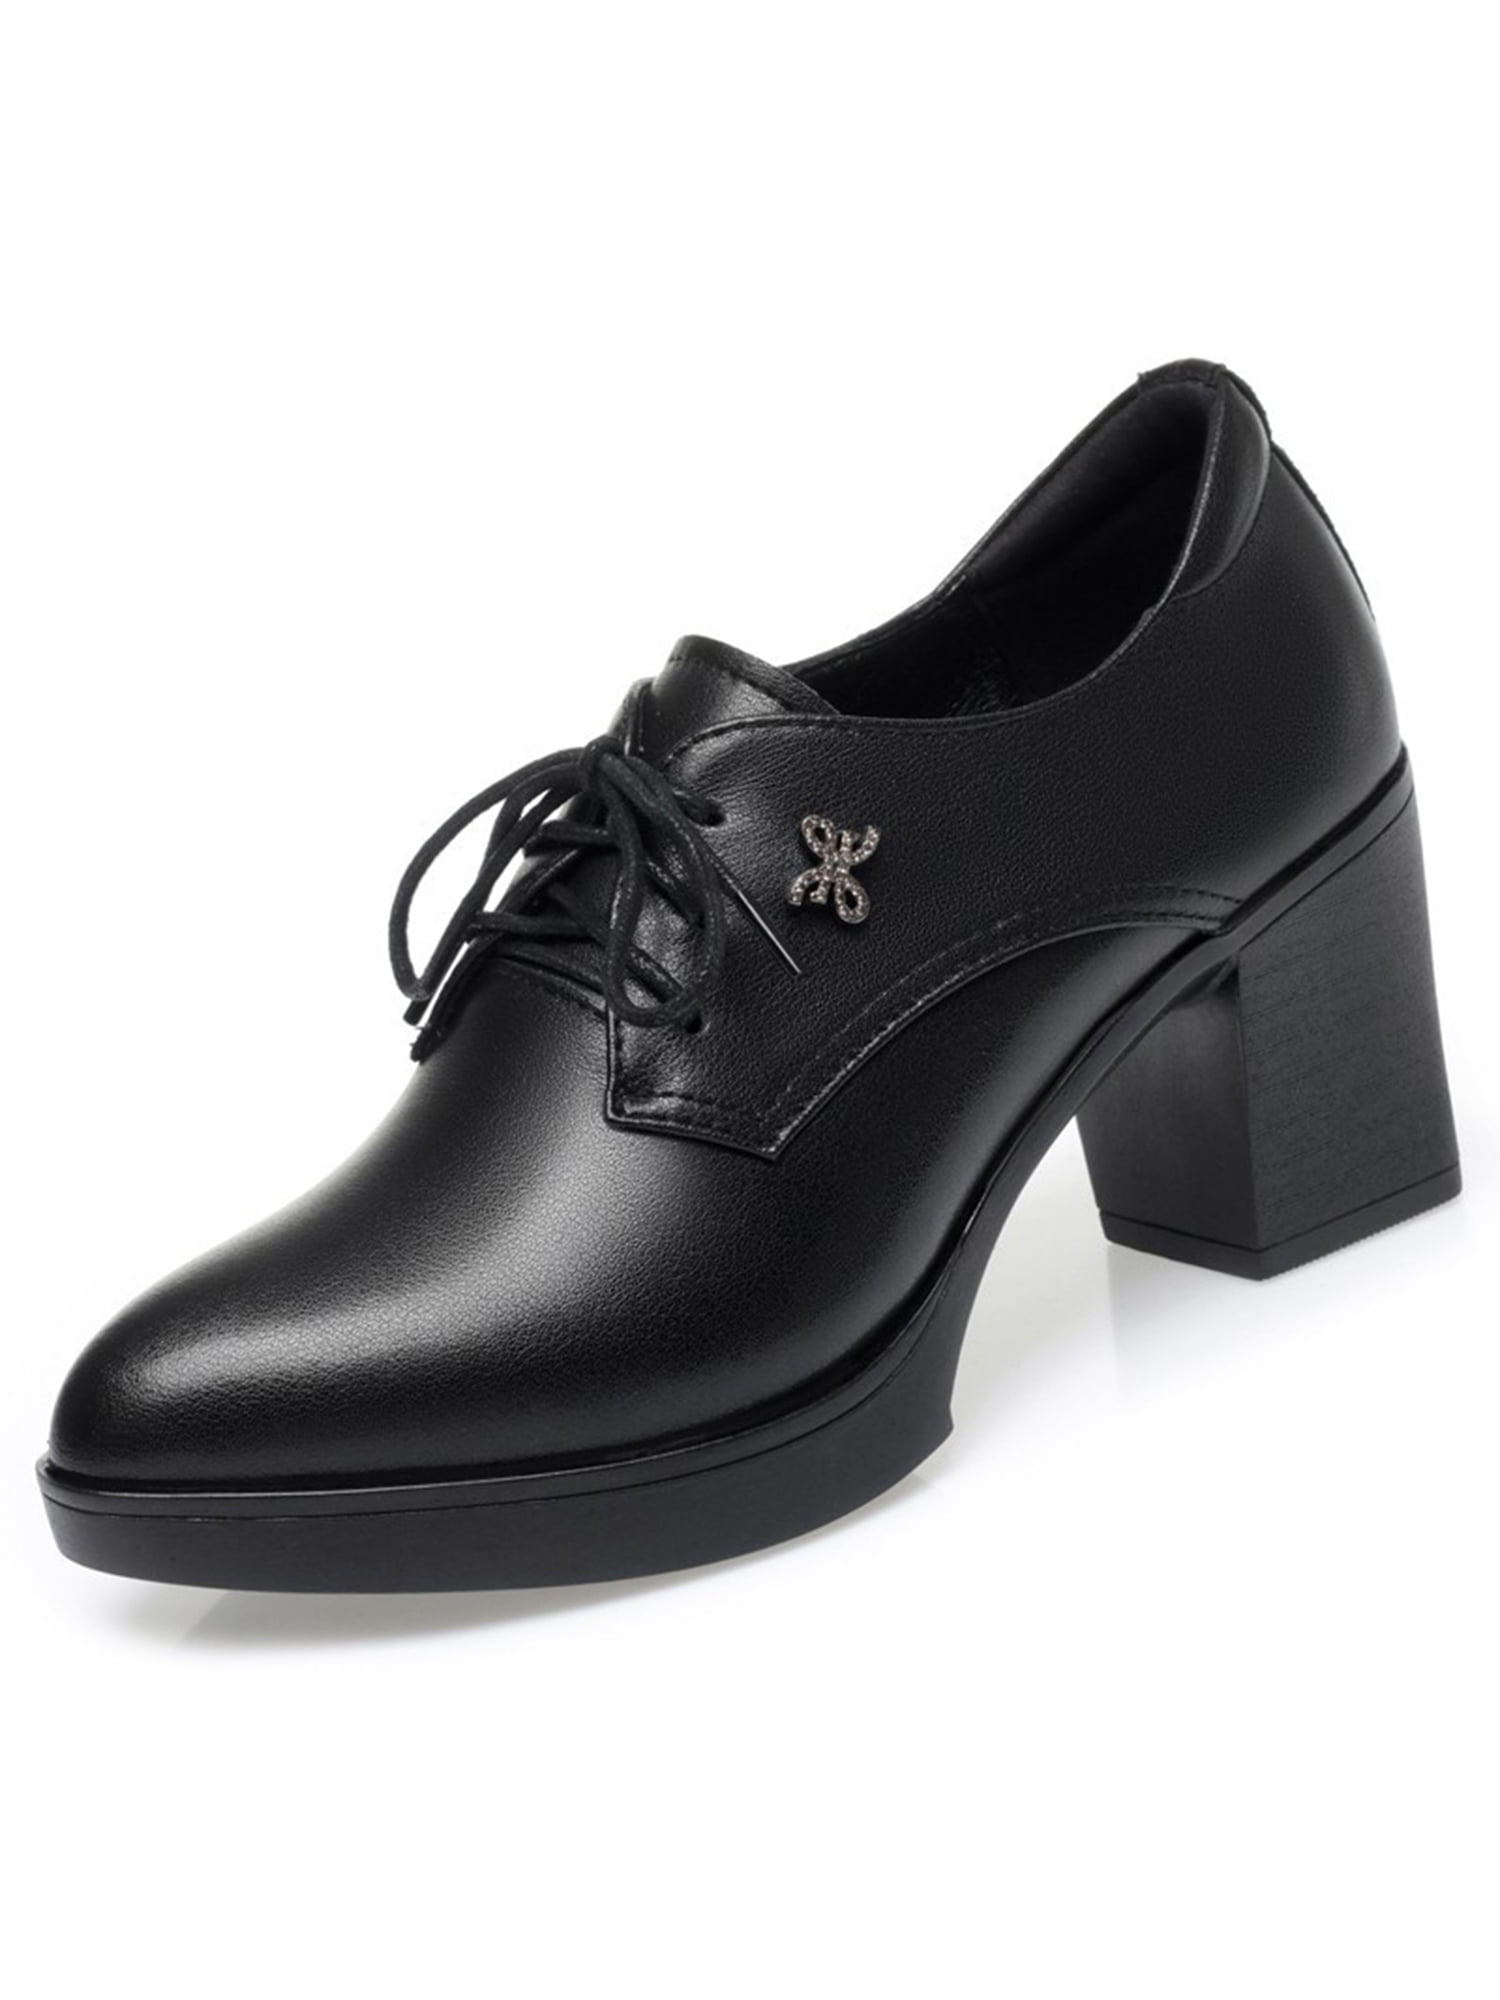 FidgetGear Fashion Retro College Girl Womens Oxford Brogues Lace Up Low  Heels Wingtip Shoes : Amazon.in: Shoes & Handbags